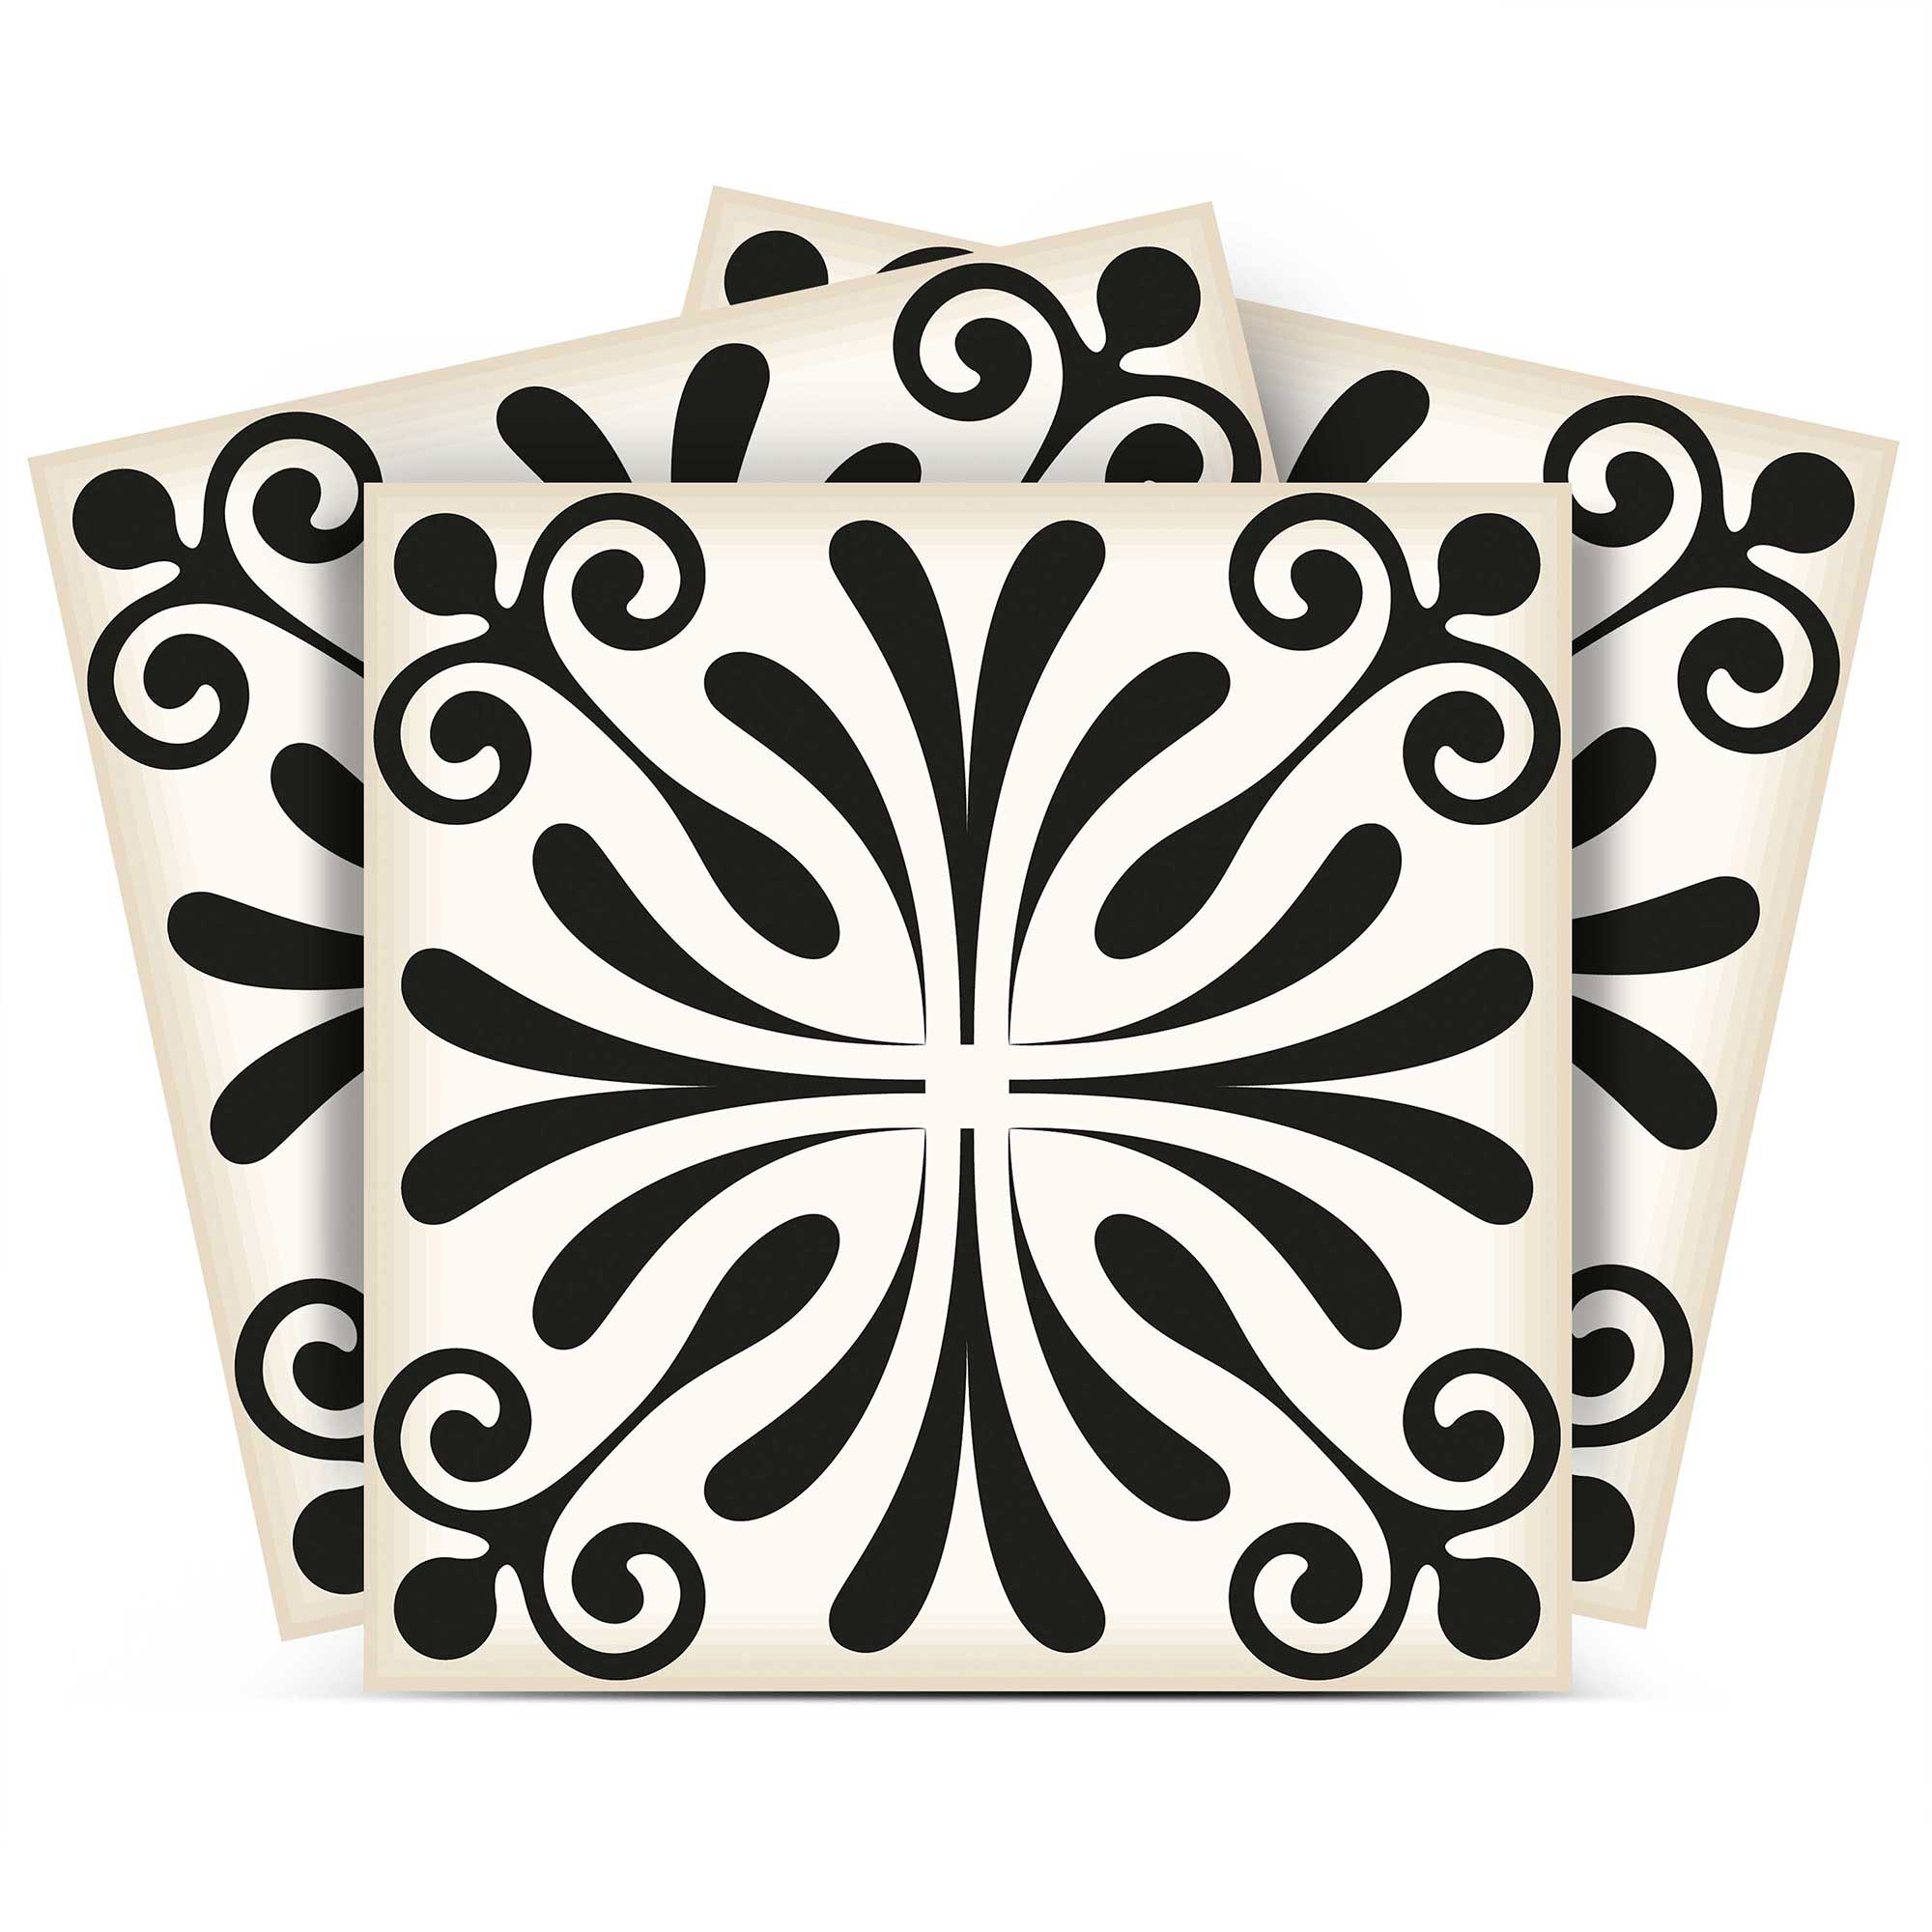 8" X 8" Black and White Flo Peel and Stick Removable Tiles-399954-1